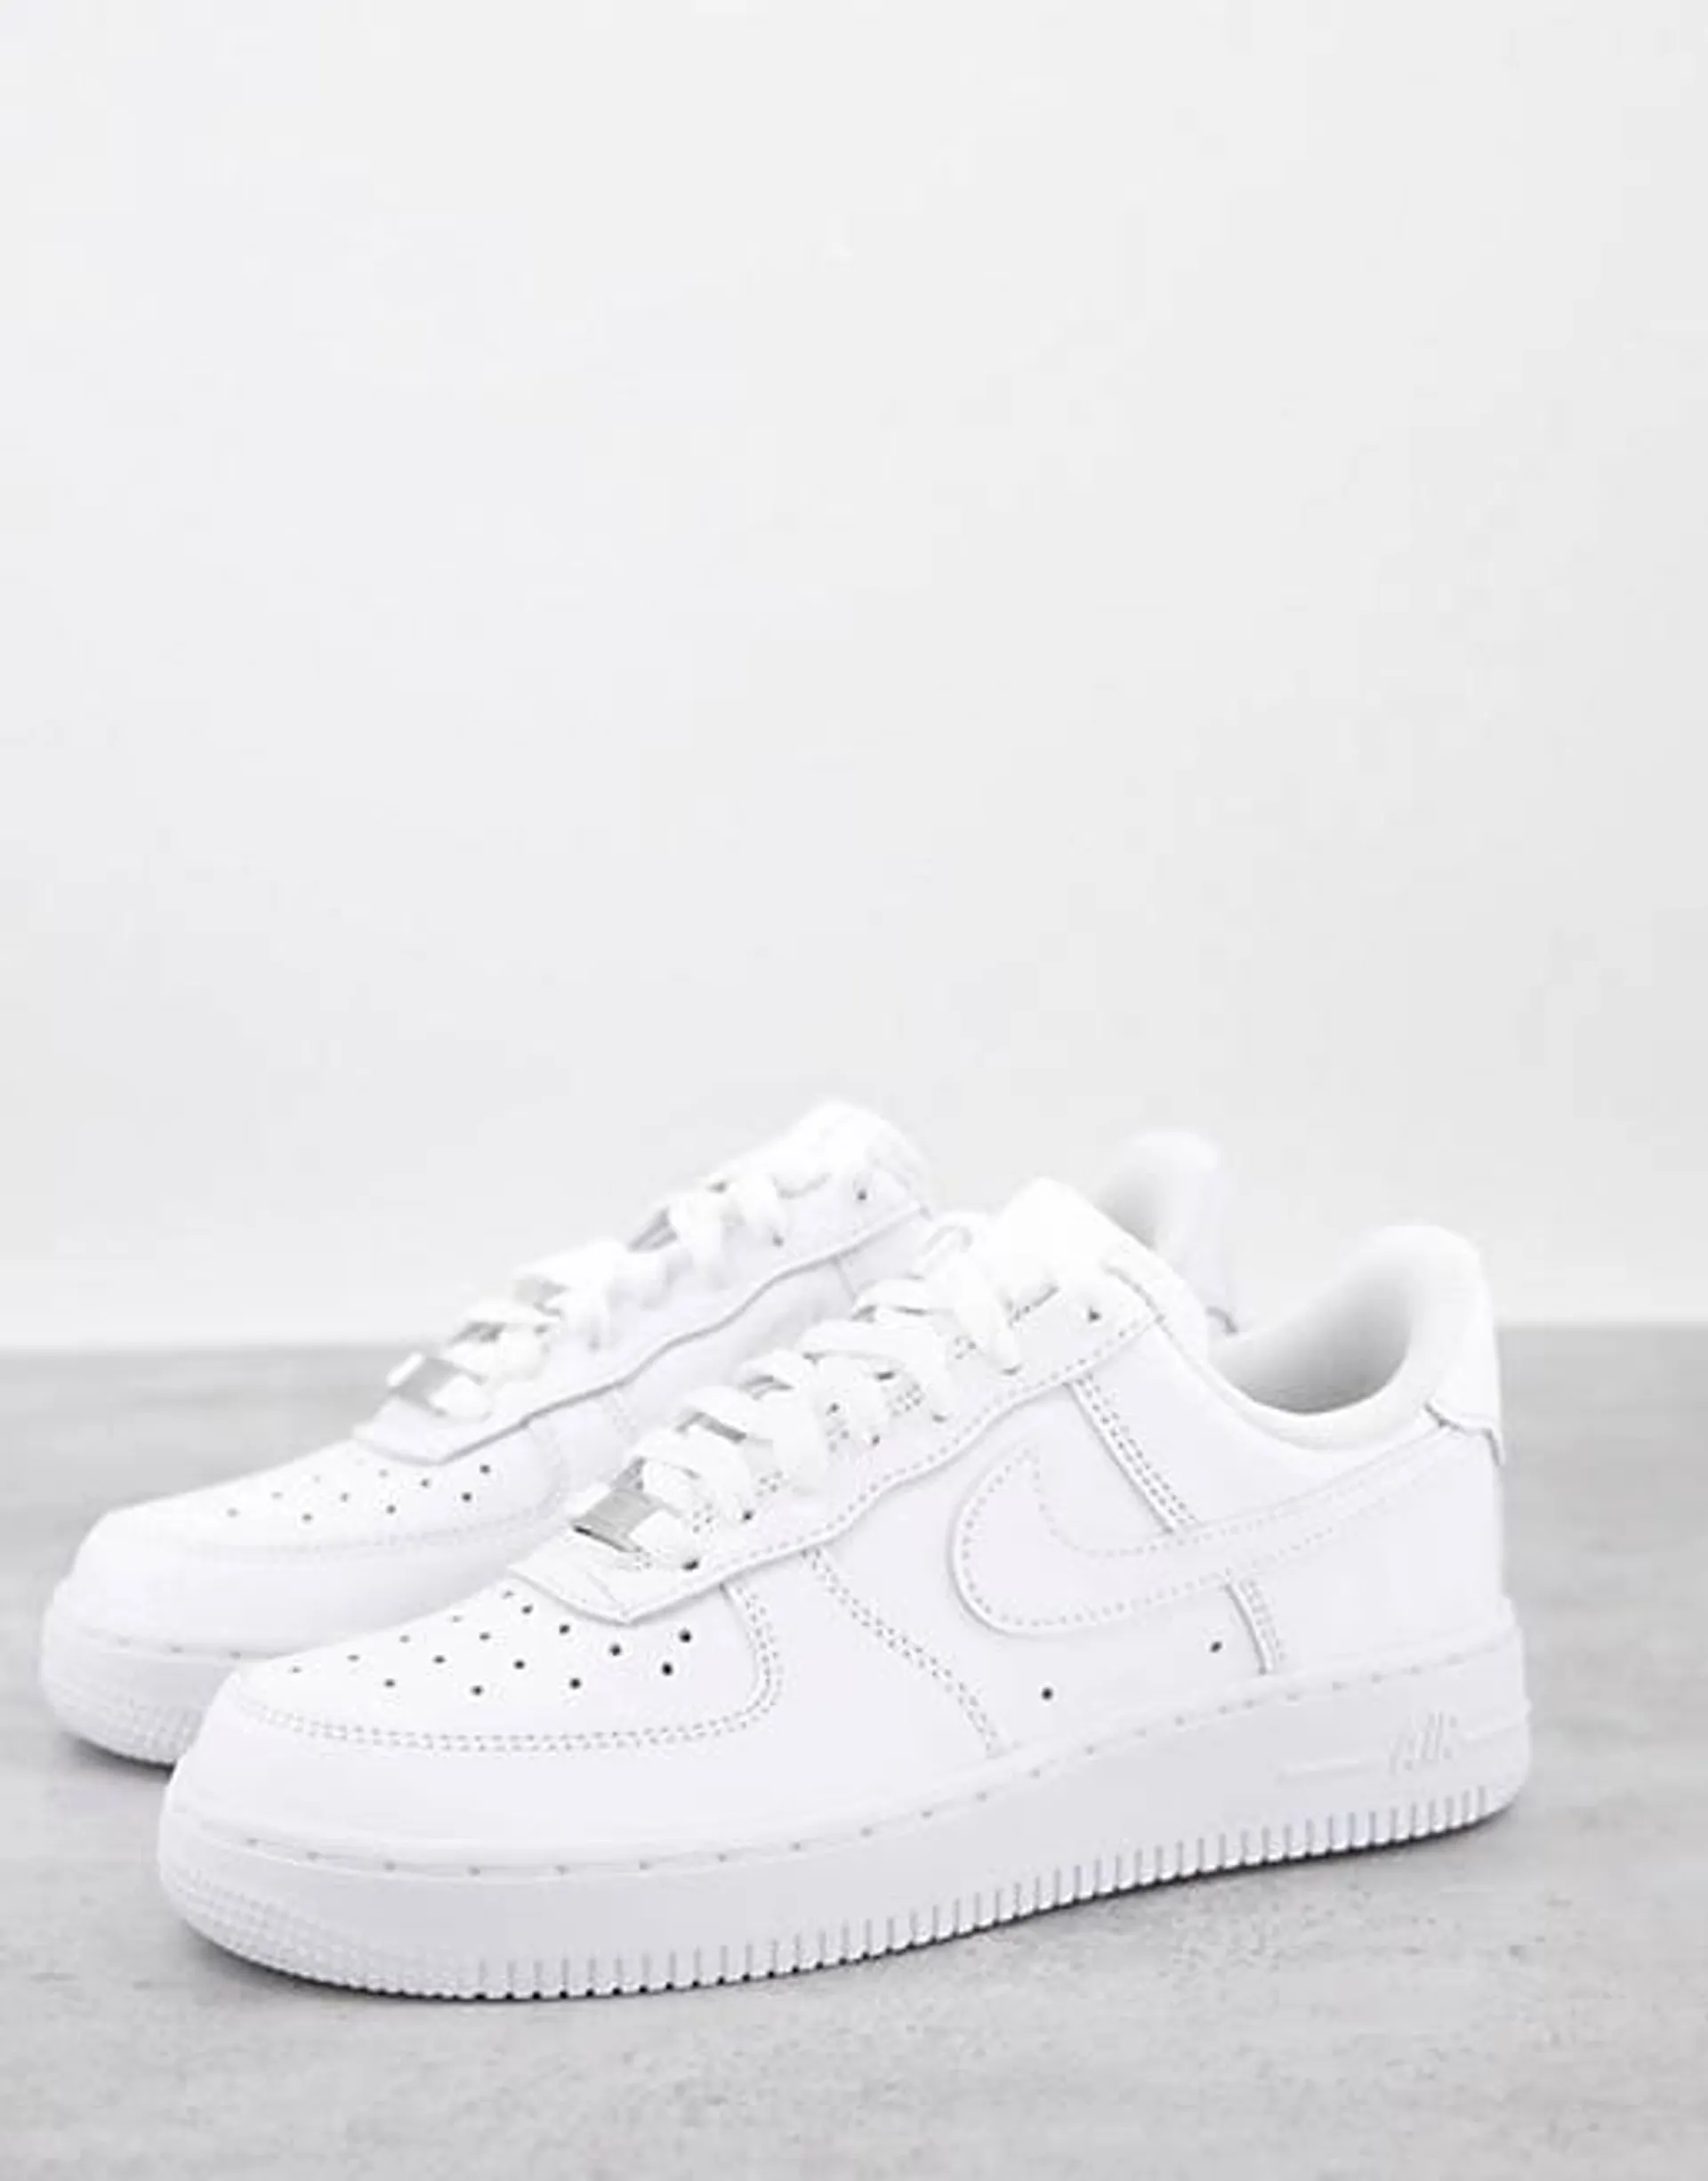 Nike Air Force 1 '07 trainers in triple white